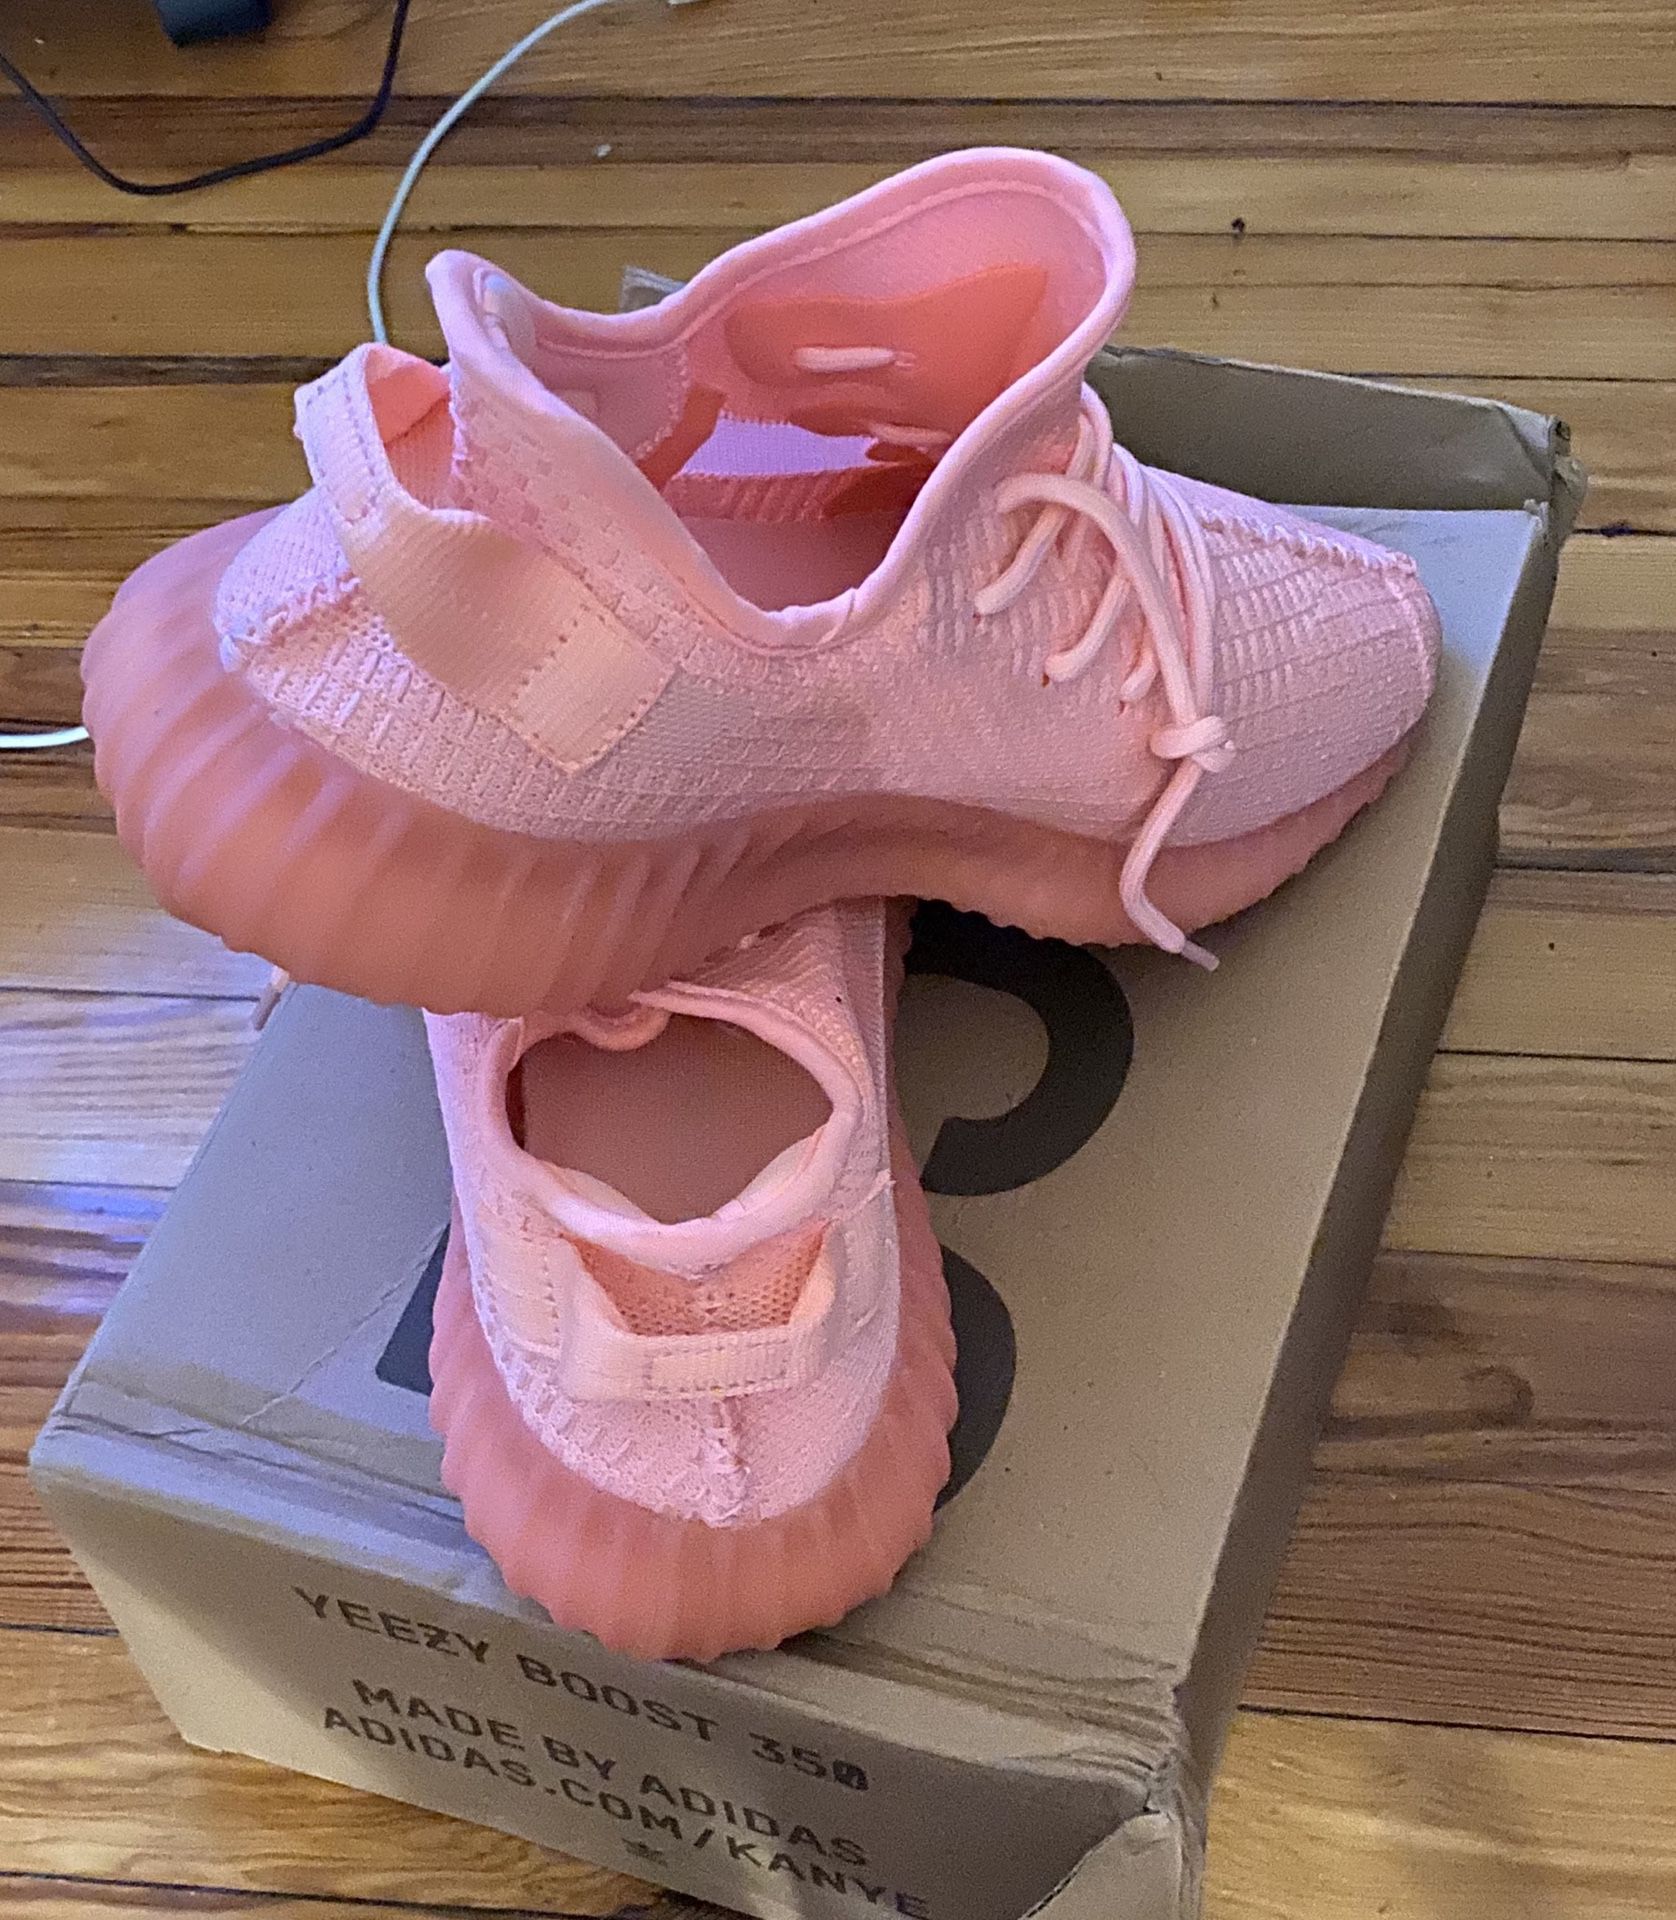 Yeezy hot pink size 10